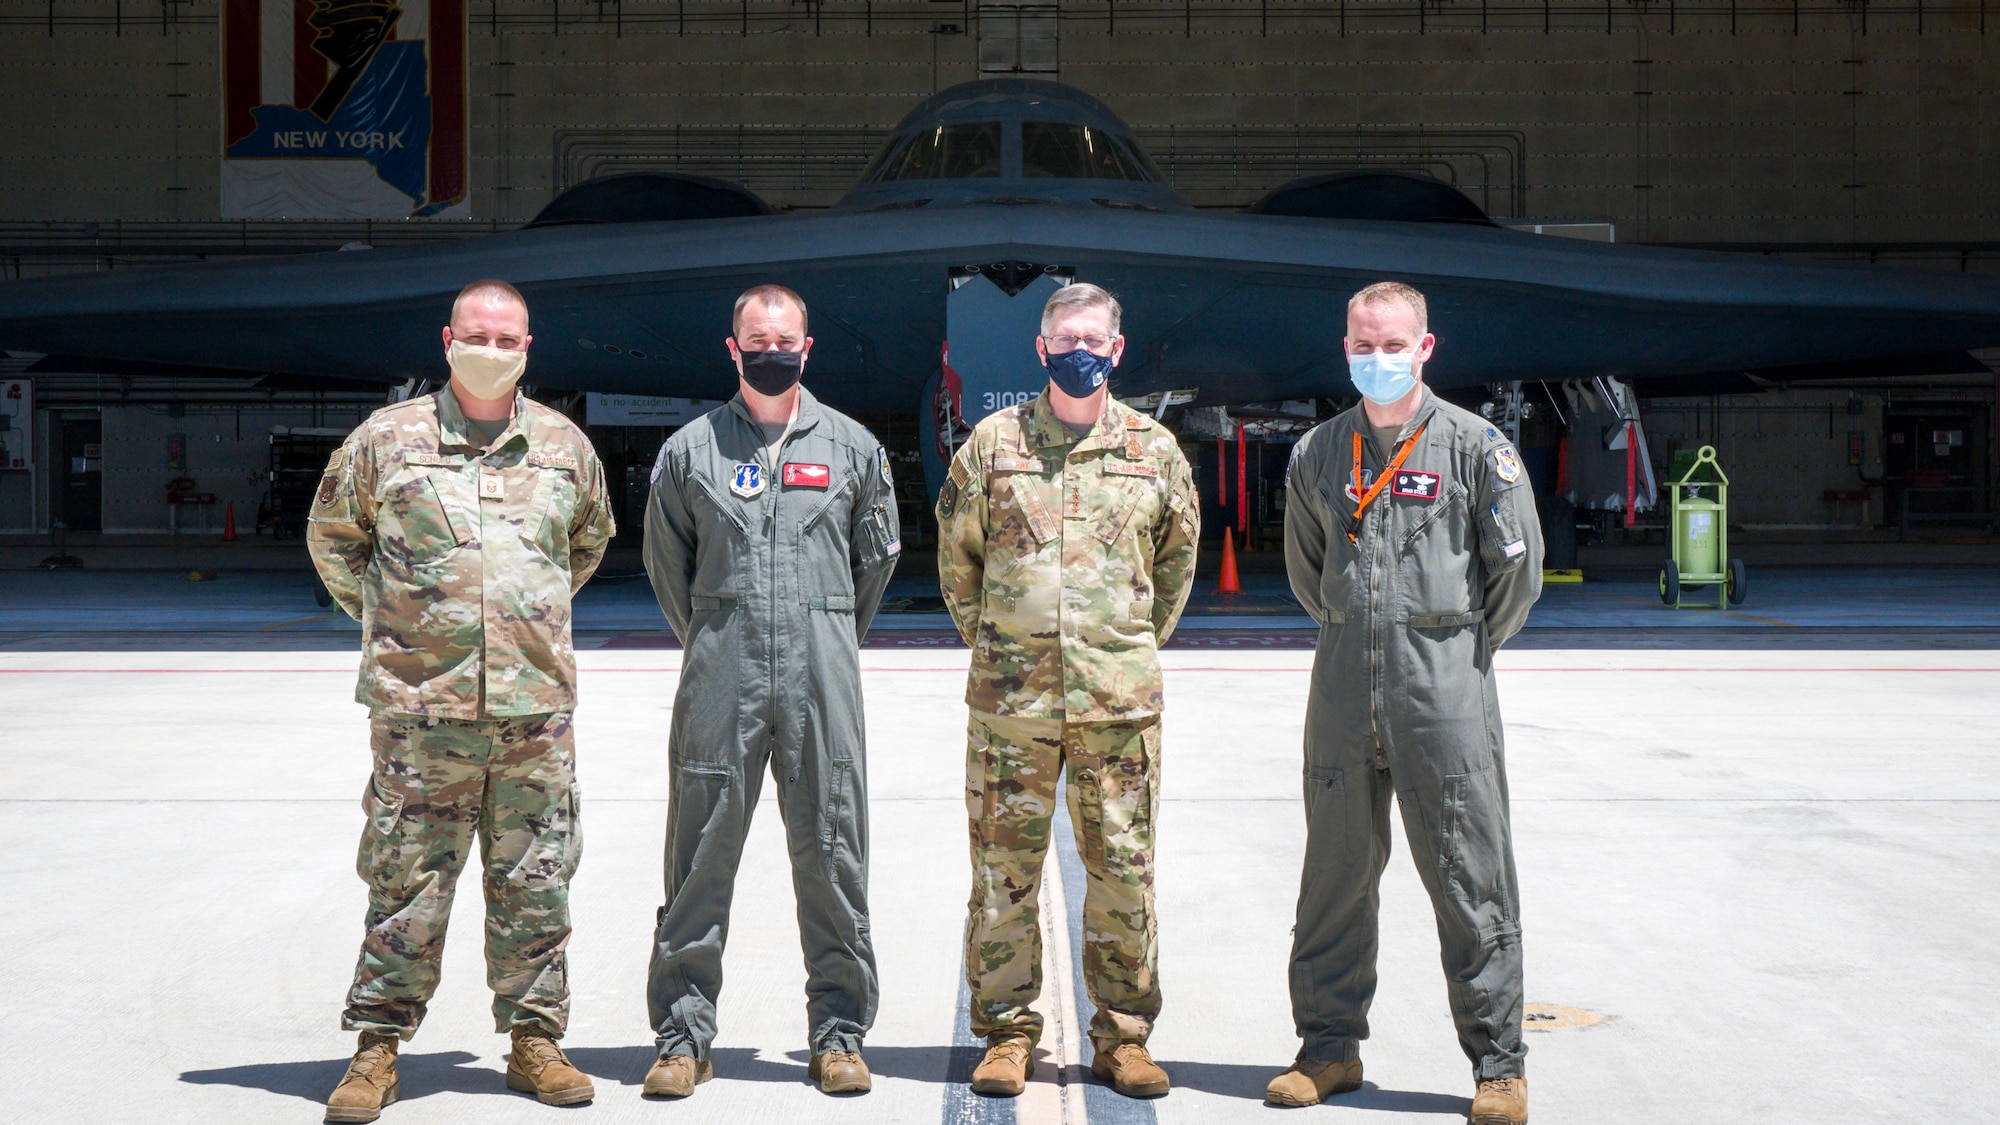 Gen. Timothy Ray, Air Force Global Strike Command commander, poses for a photo with B-2 test program personnel Master Sgt. Brock Schuld, 131st Aircraft Maintenance Squadron, Lt. Col. Matthew Howard, 110th Bomb Squadron commander, and Lt. Col. Brian Stiles, 72nd Test and Evaluation Squadron commander, in front of the B-2 "Spirit of Pennsylvania" during his visit to Edwards Air Force Base, California, May 5. (Air Force photo by Giancarlo Casem)